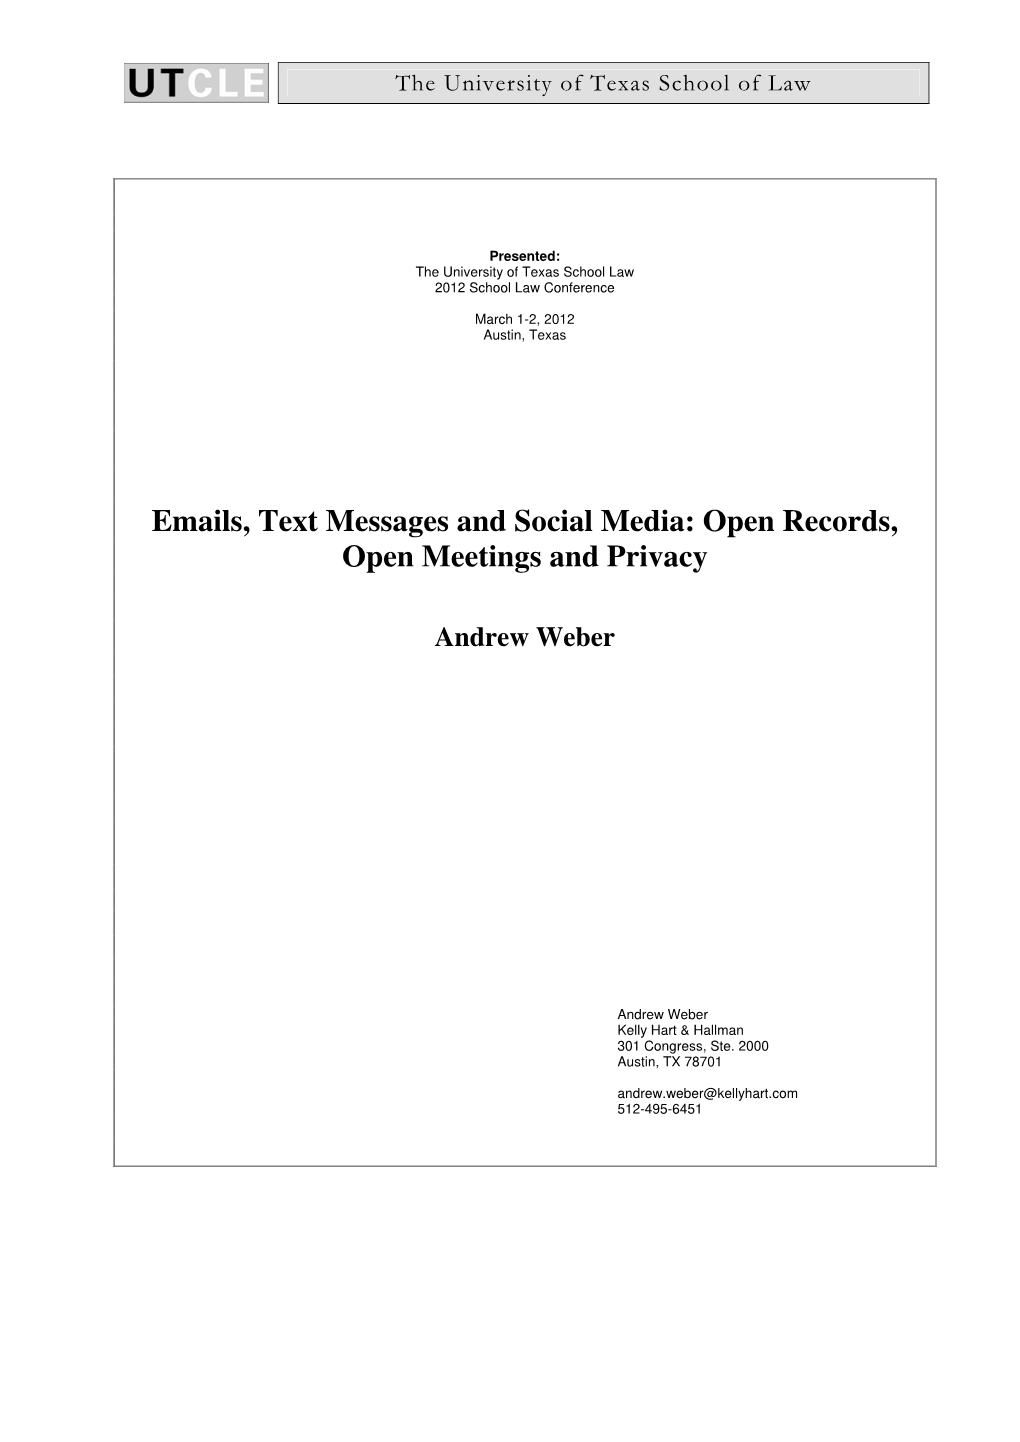 Emails, Text Messages and Social Media: Open Records, Open Meetings and Privacy